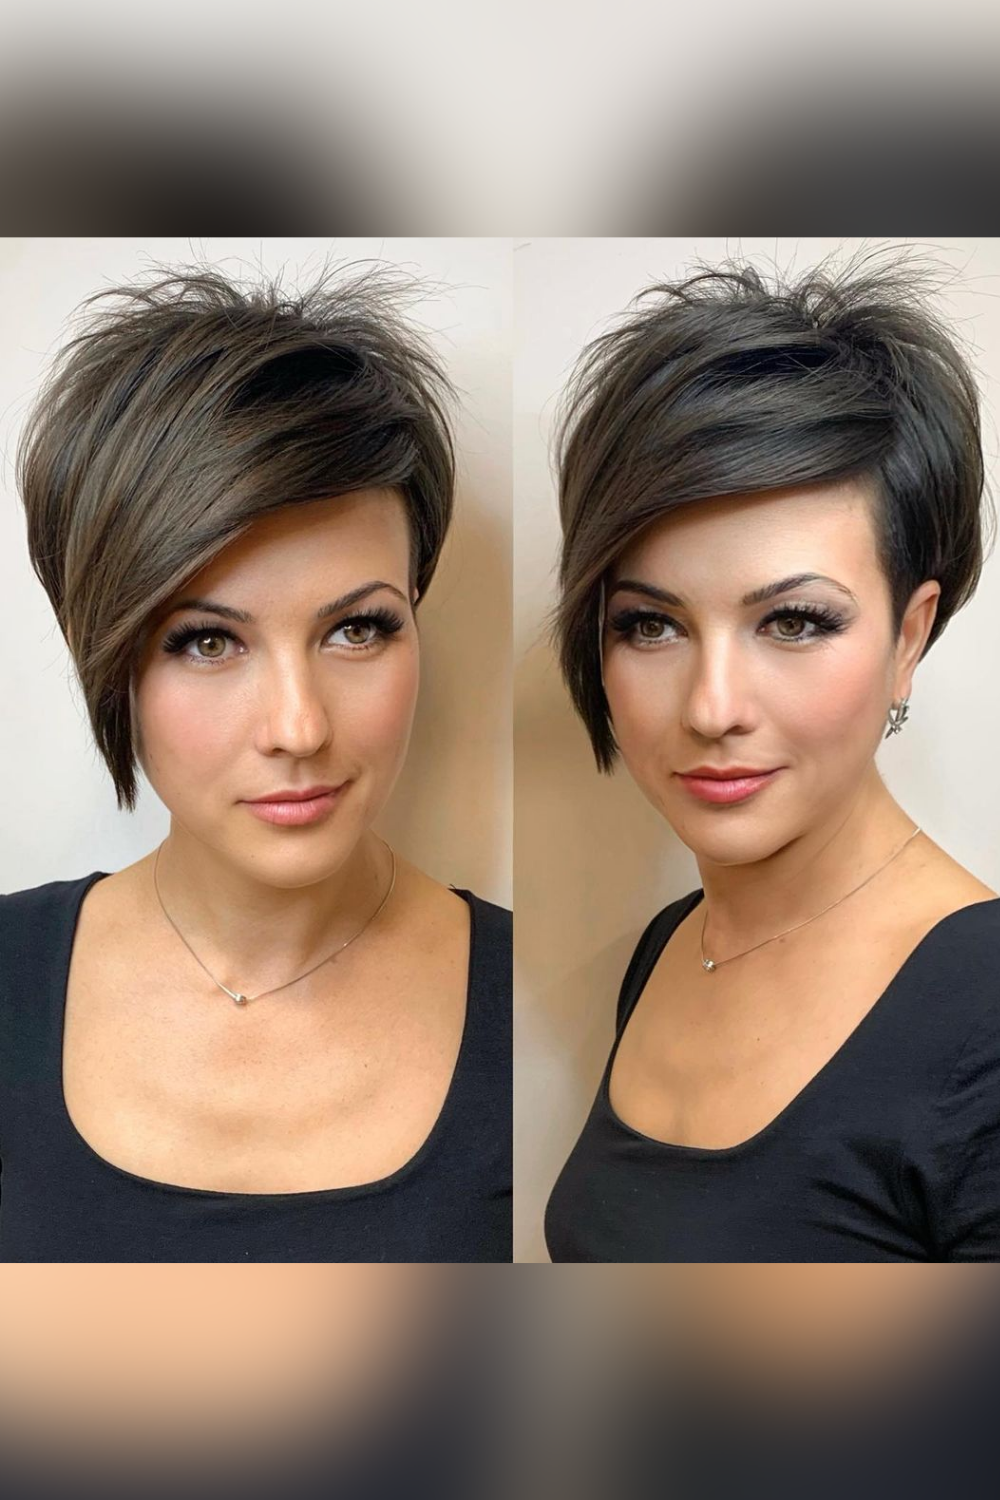 Hair trends that can stay in the next year - Hair trends that can stay in the next year